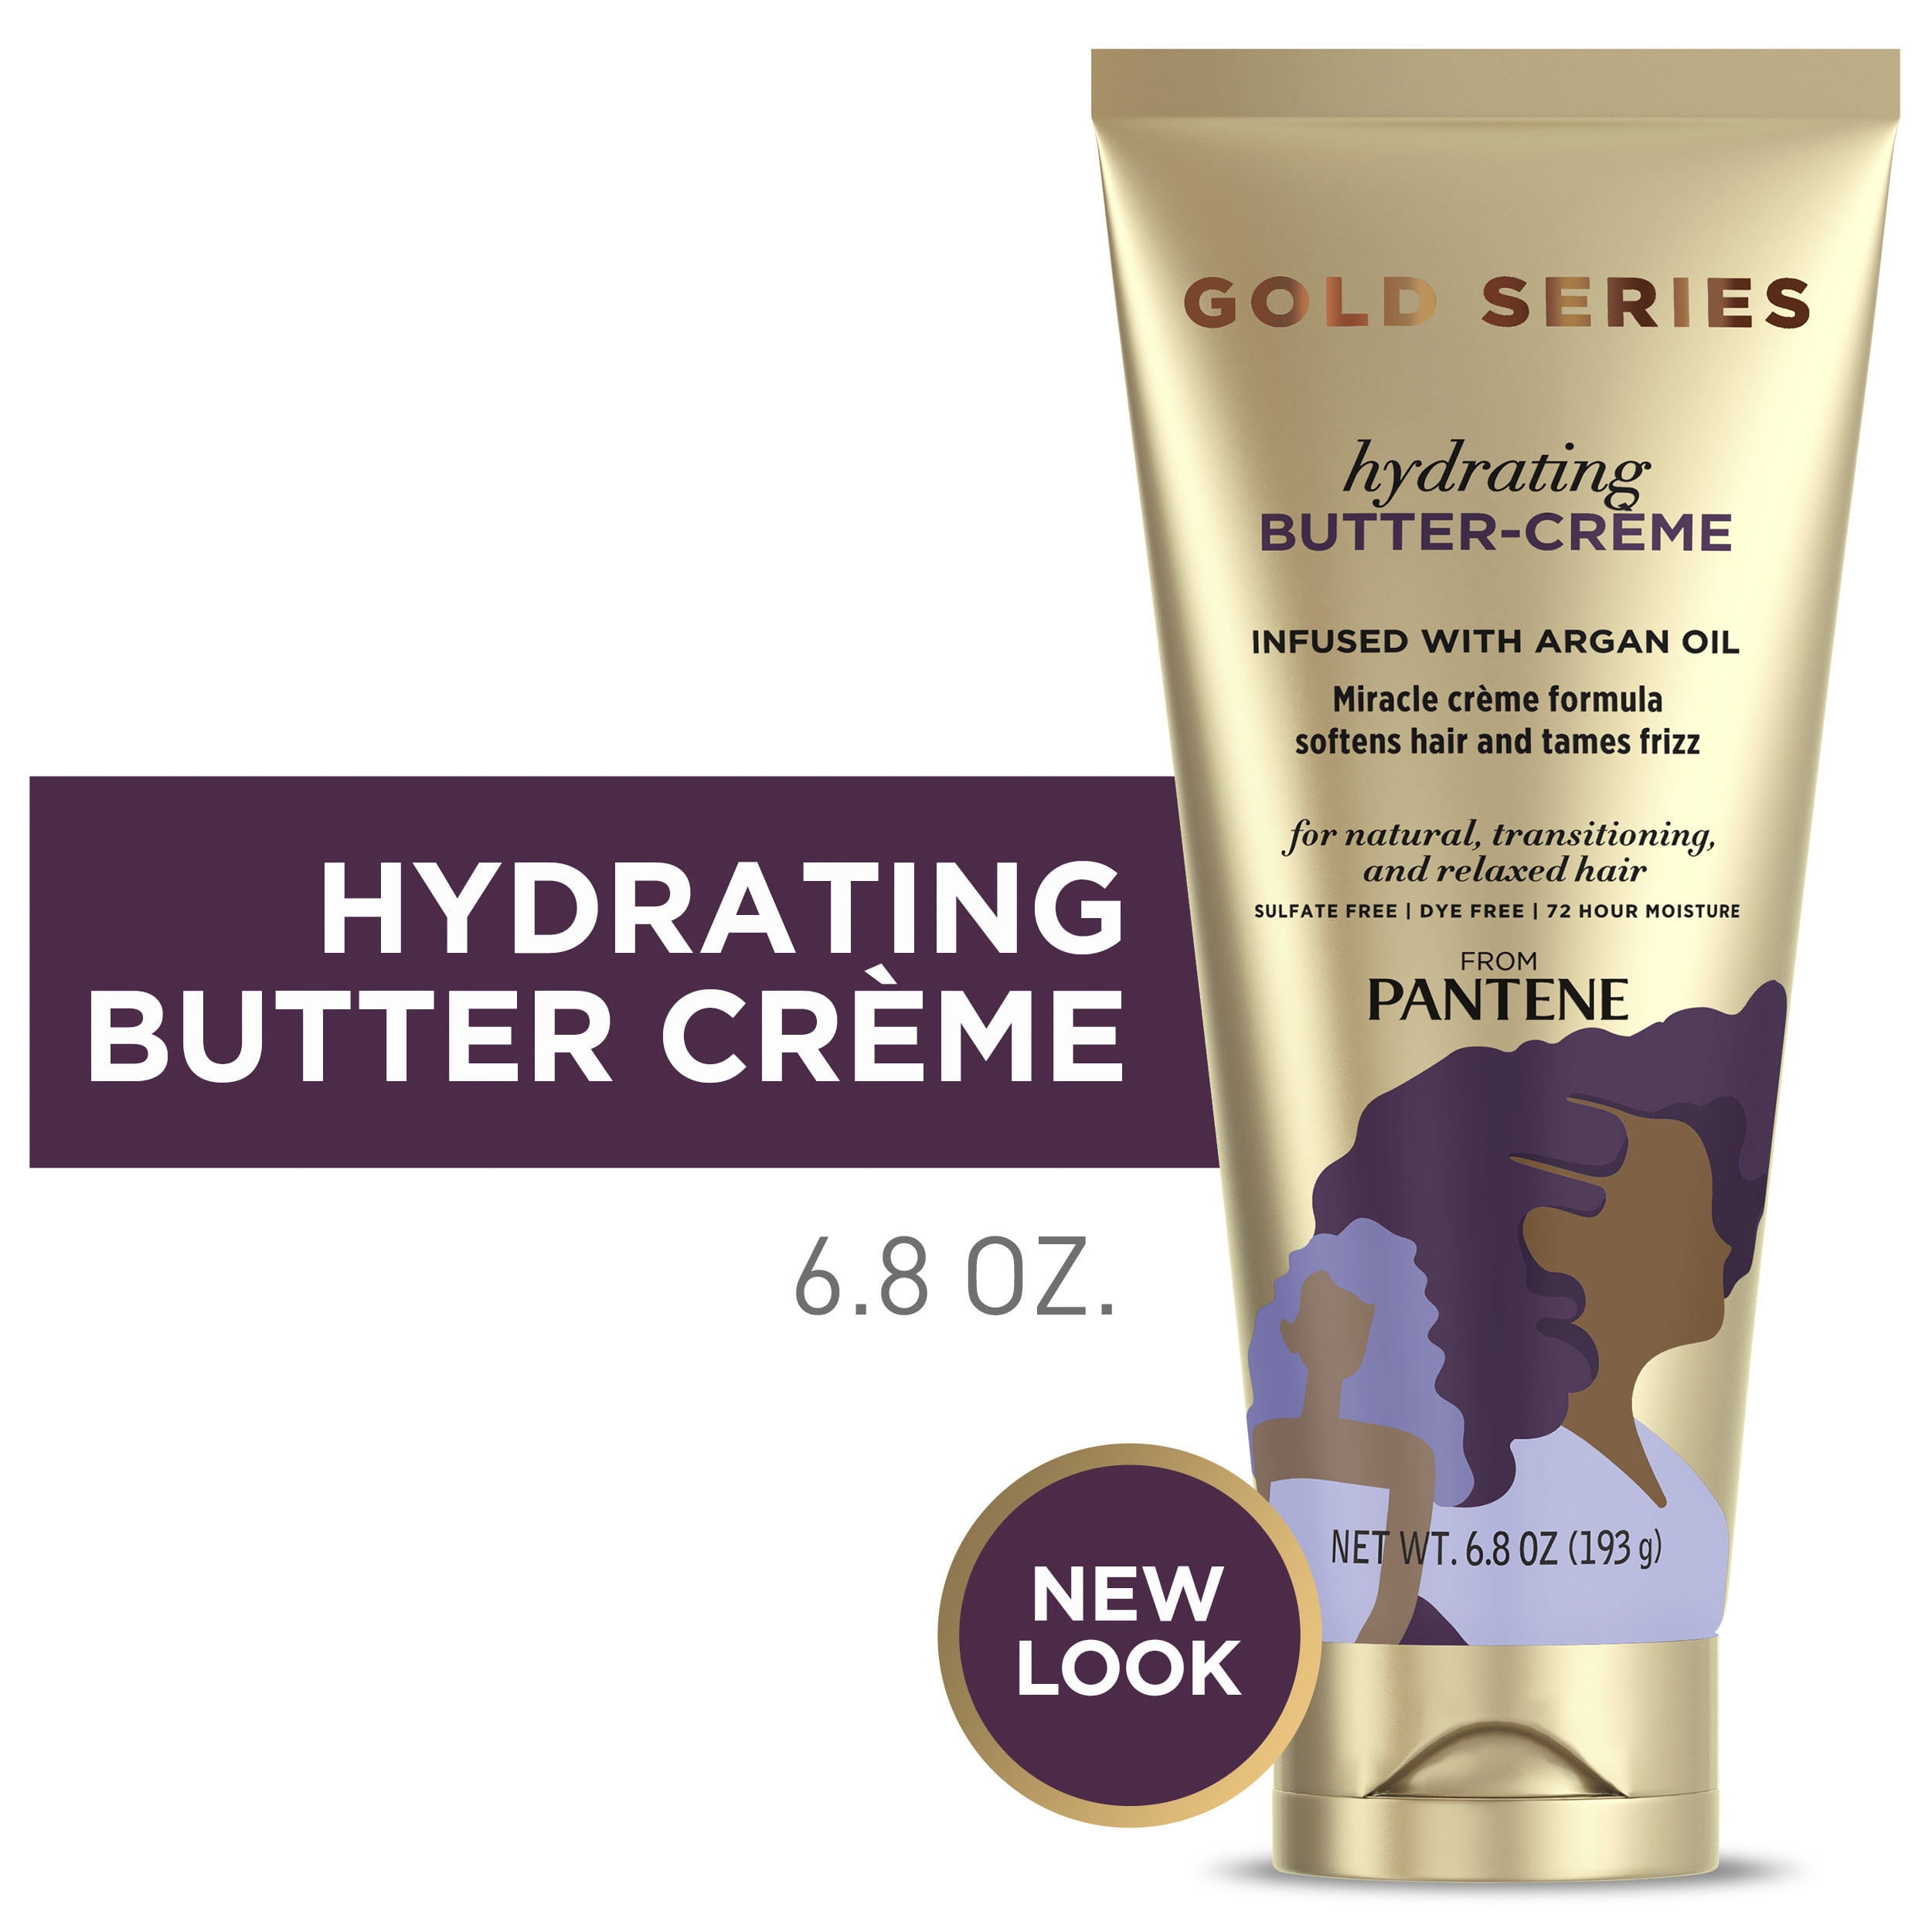 Pantene Gold Series Butter Cream, Hydrating Sulfate Free, 6.8 oz